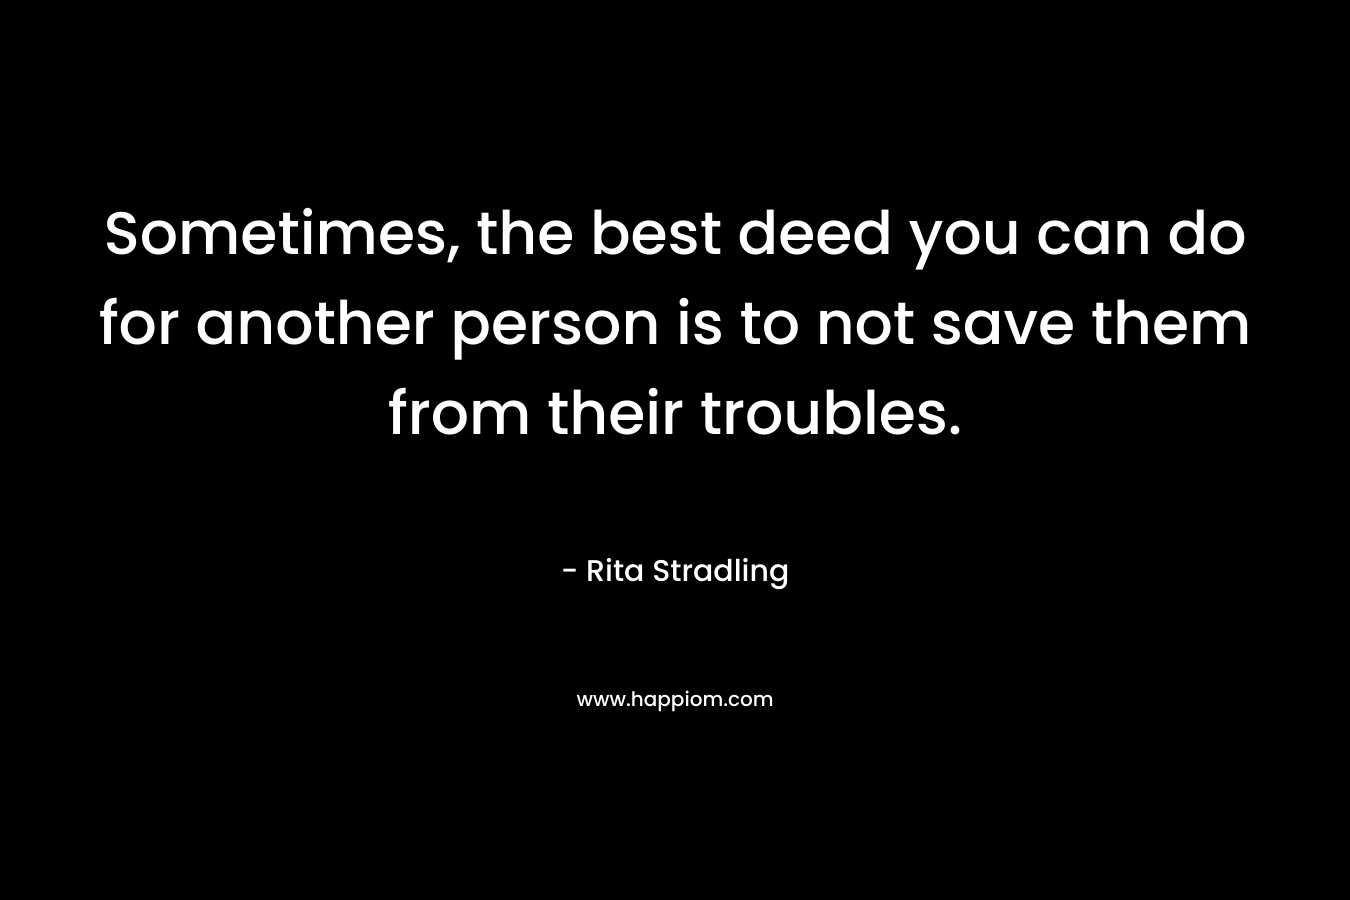 Sometimes, the best deed you can do for another person is to not save them from their troubles.